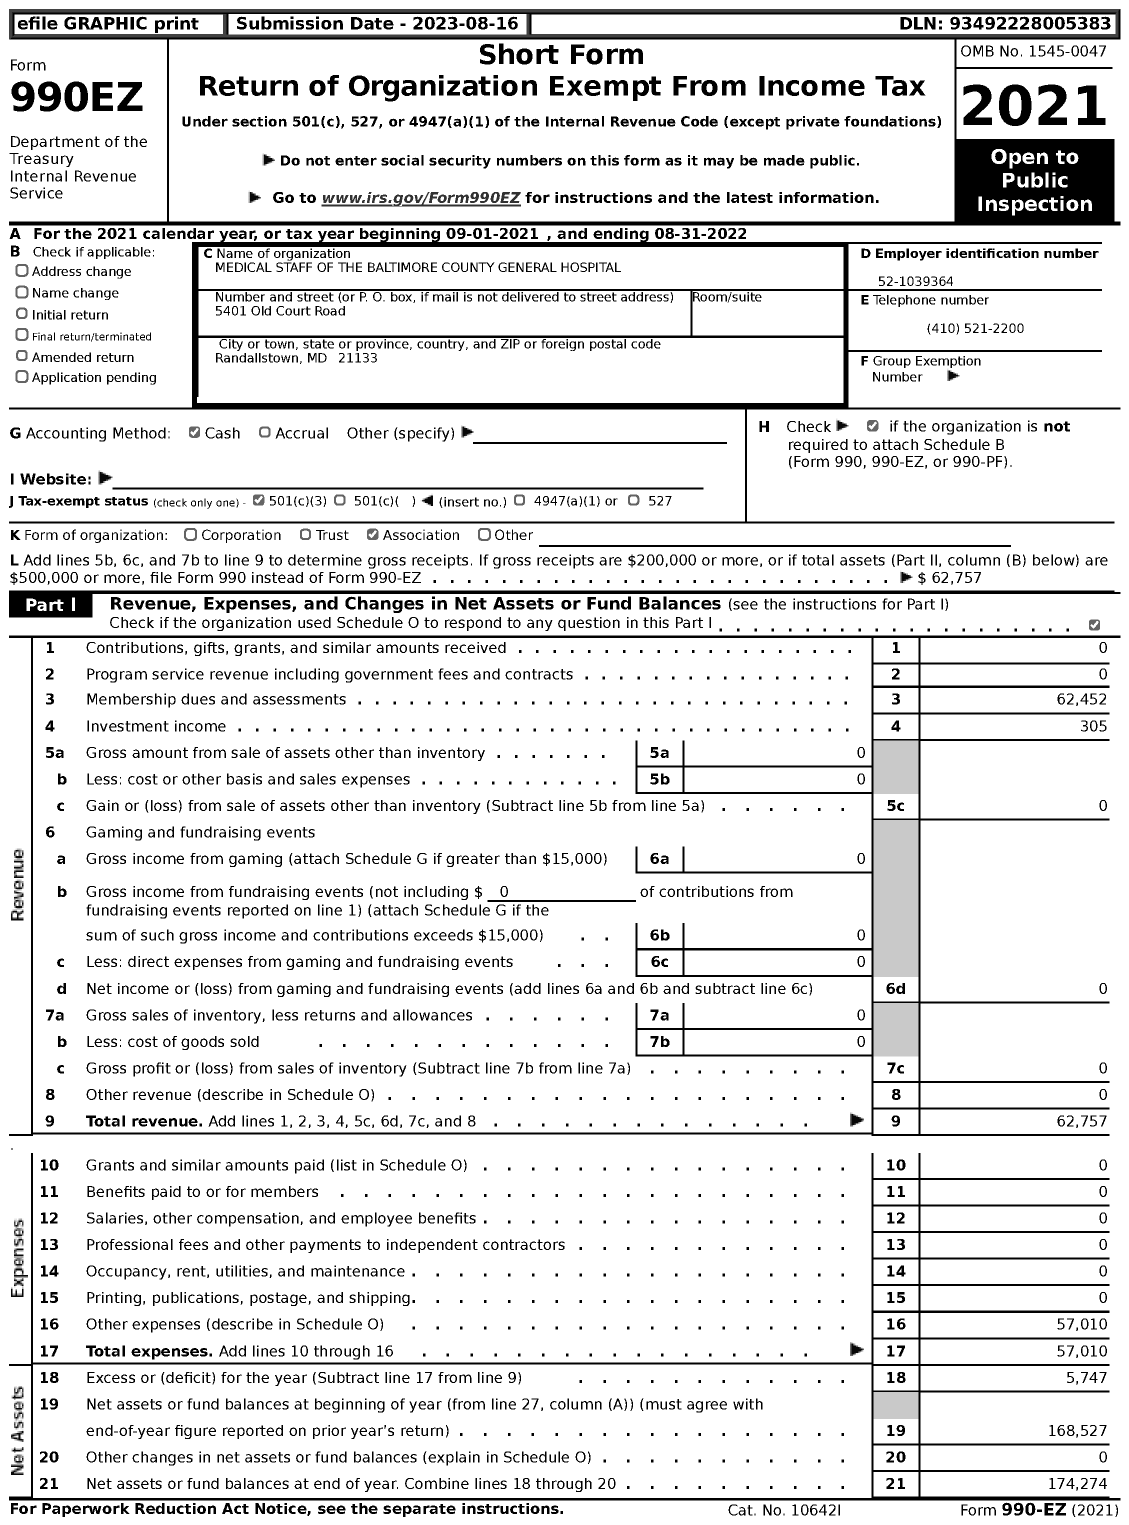 Image of first page of 2021 Form 990EZ for Medical Staff of the Baltimore County General Hospital